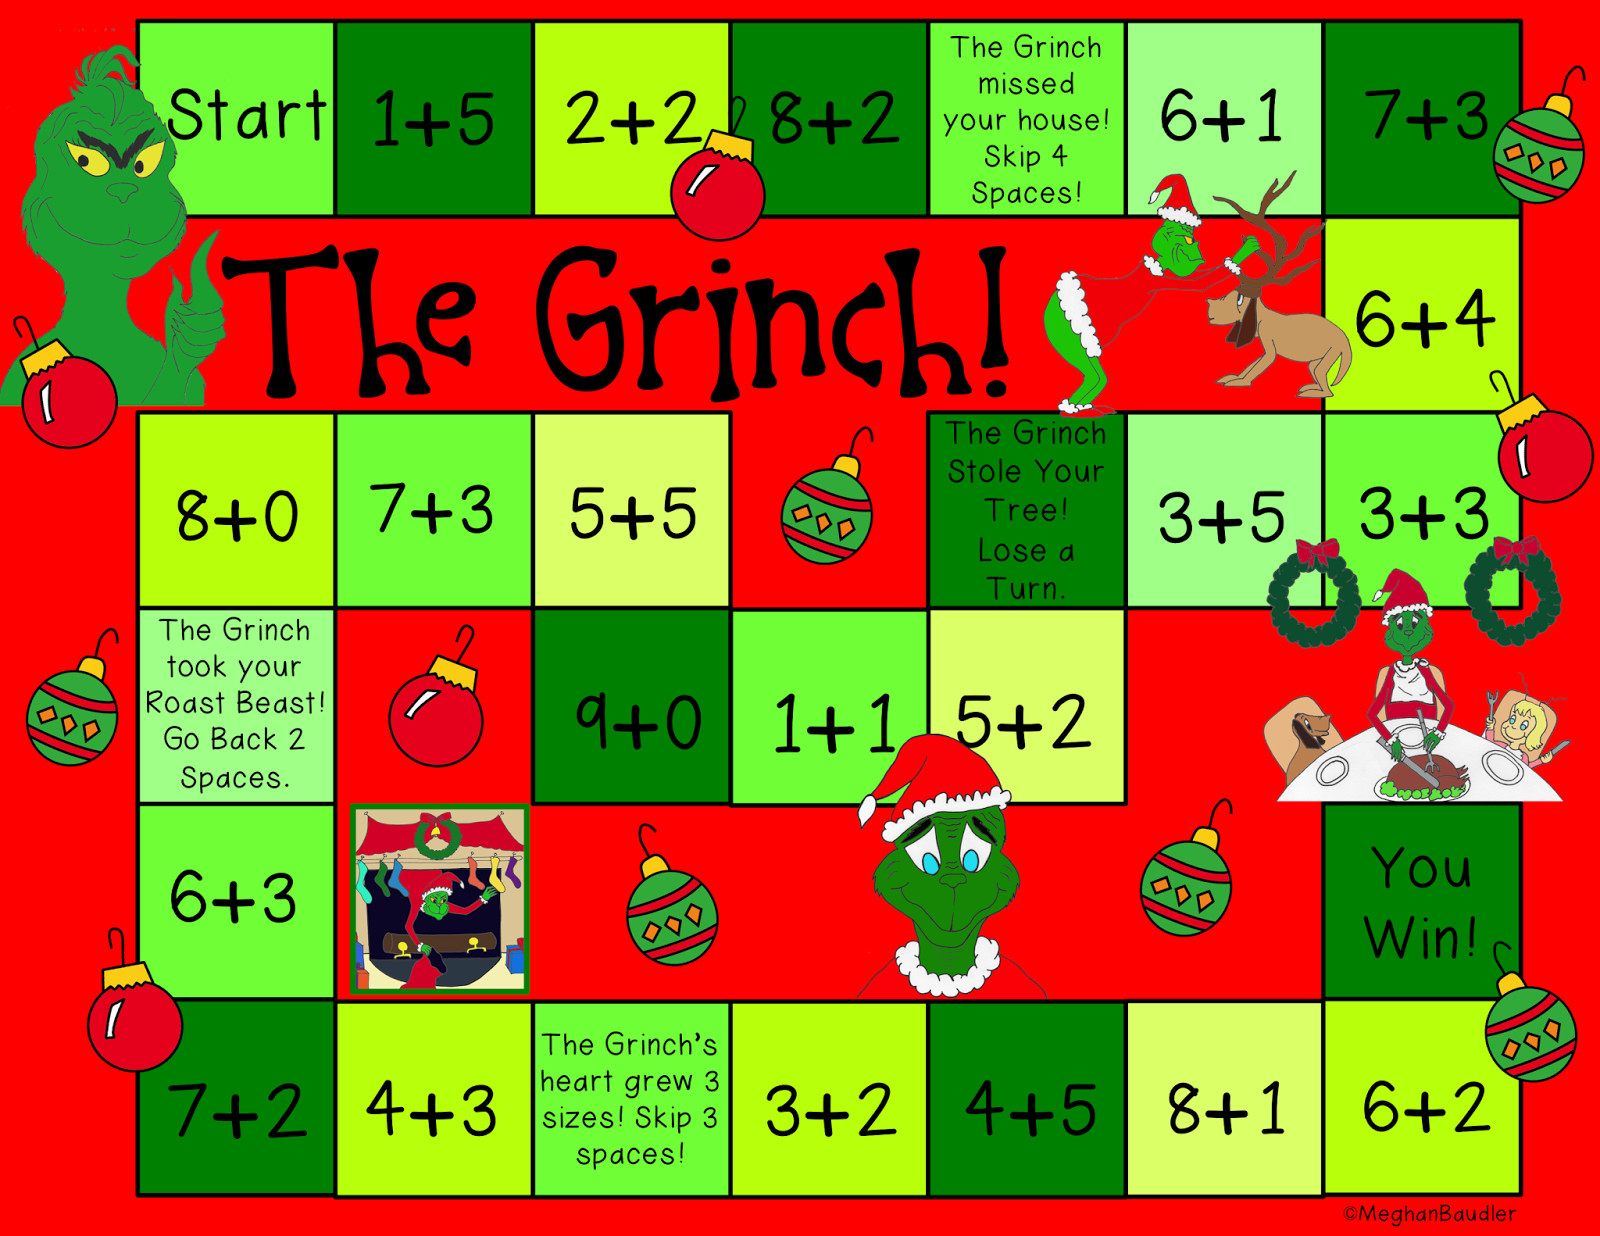 1St Grade Christmas Party Ideas
 The Creative Colorful Classroom Grinch Day Plans